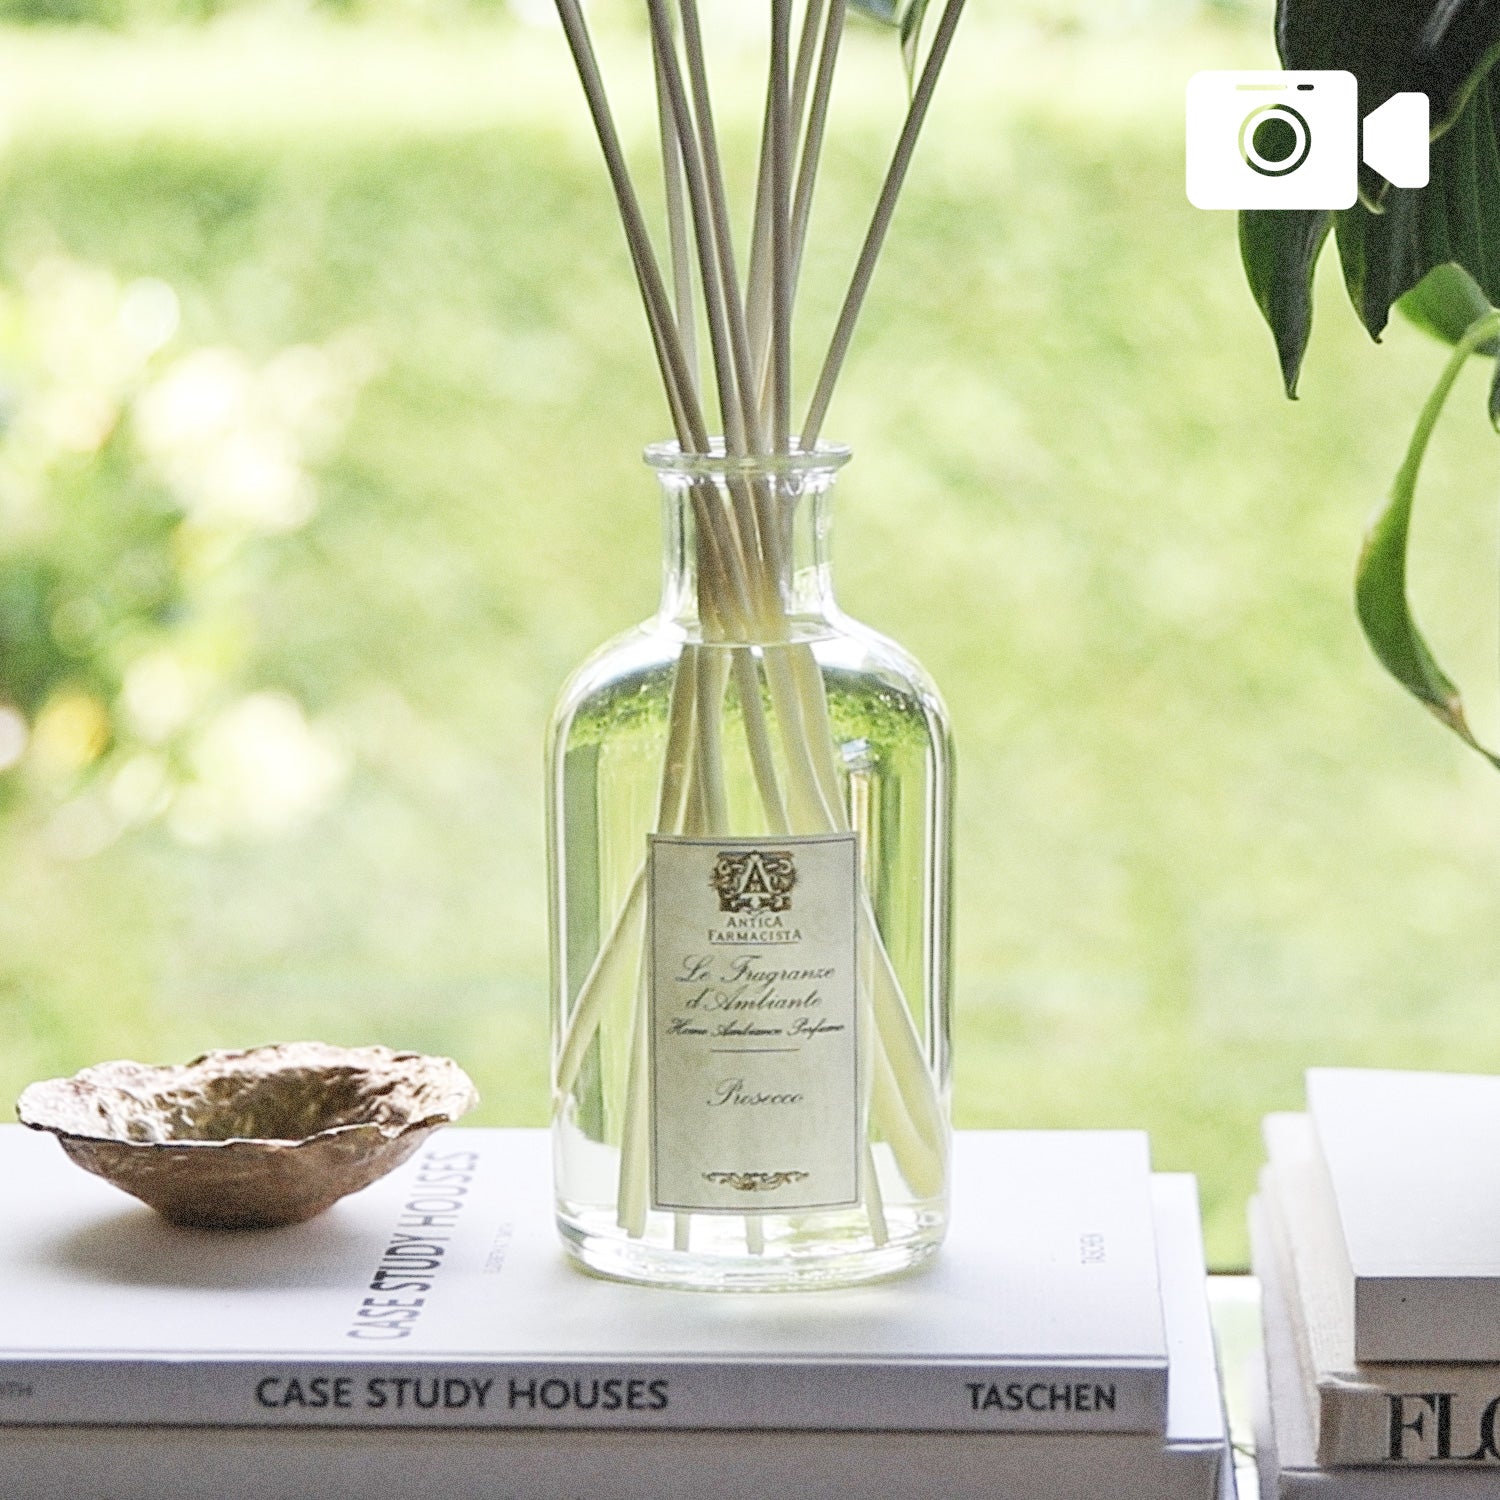 How to Use Your Reed Diffuser